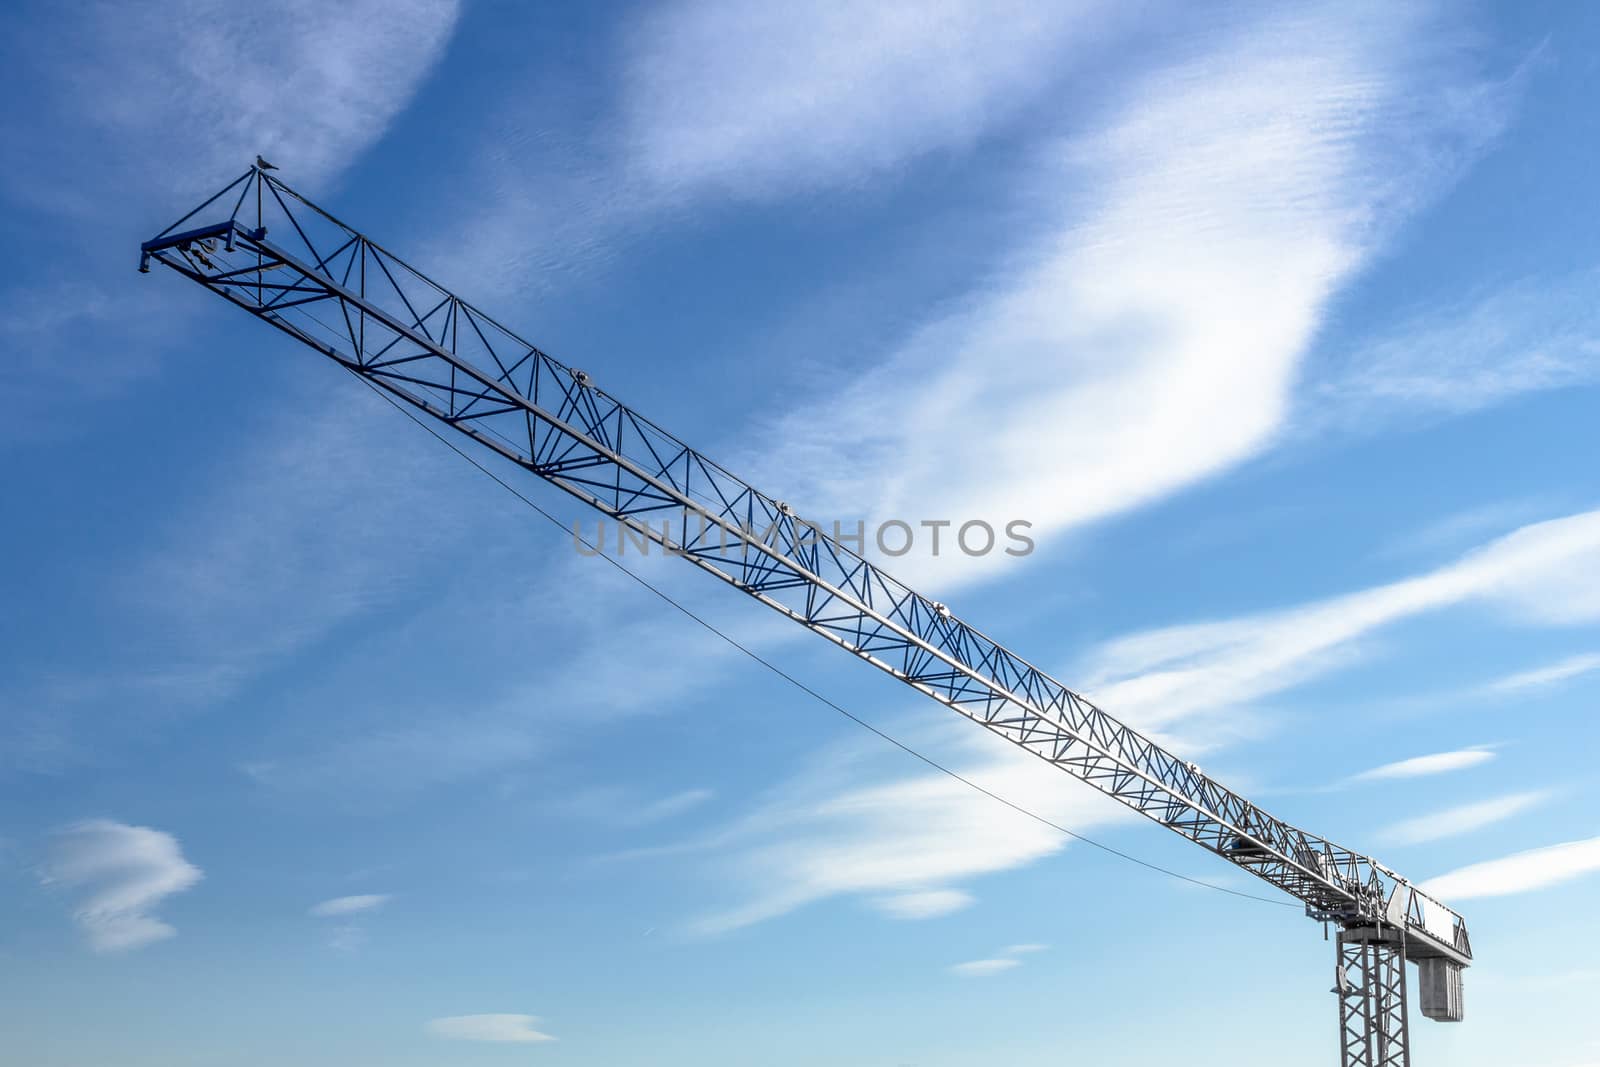 Bottom view of a large crane, with blue sky in the background.